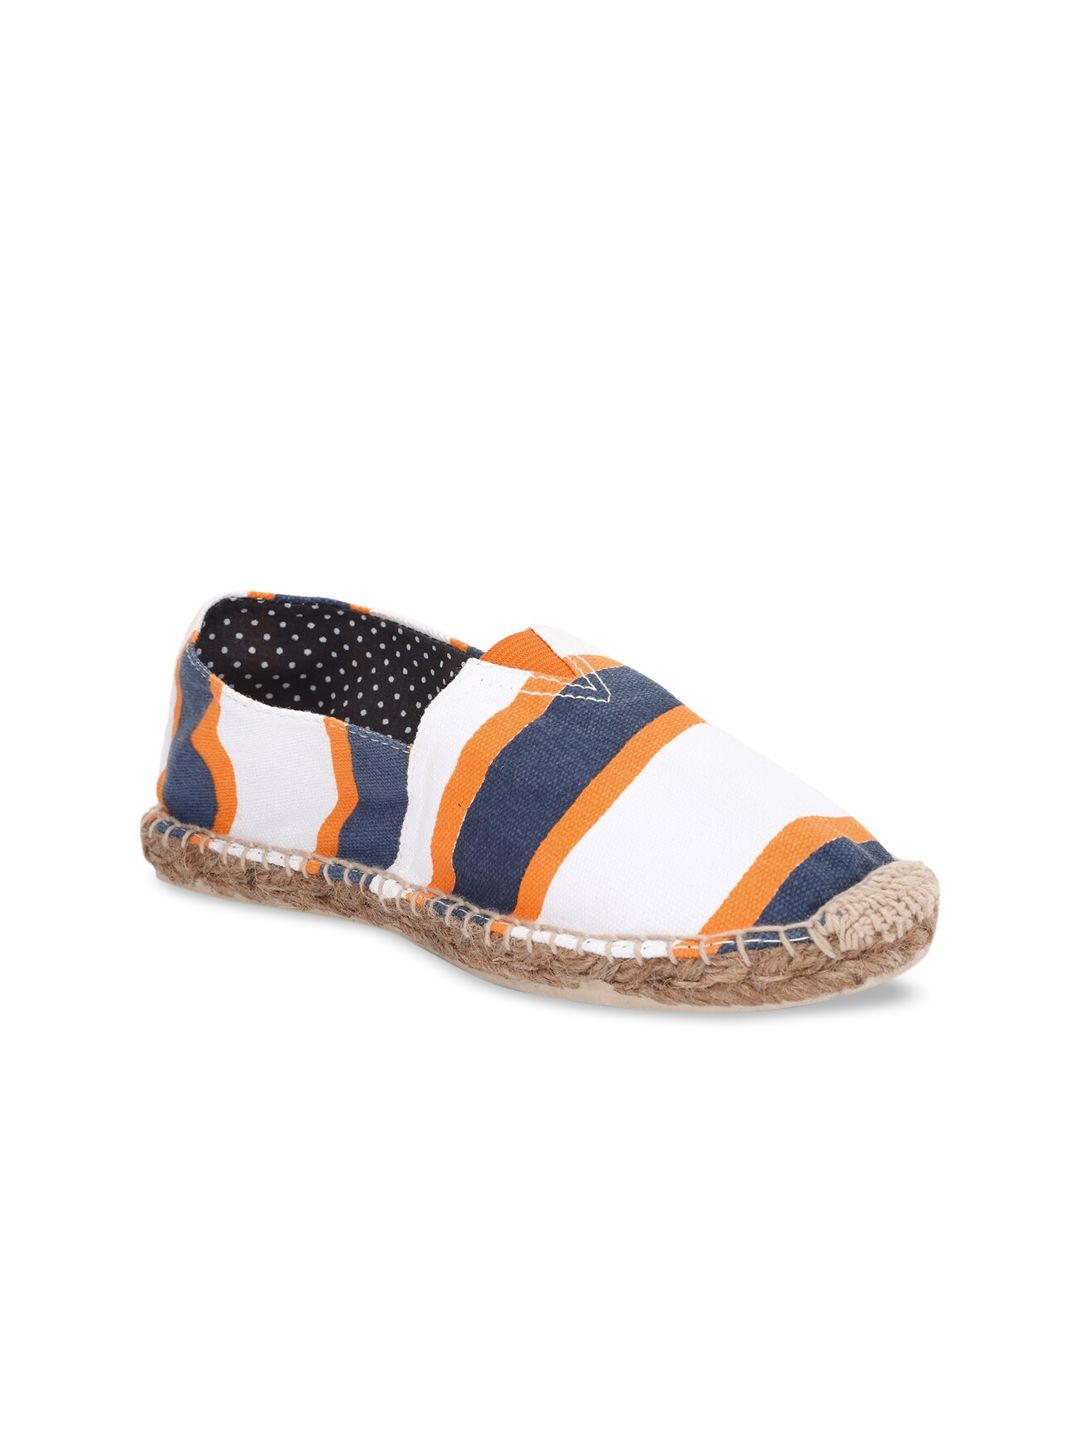 FOREVER 21 Women White & Navy Blue Striped Espadrilles Price in India